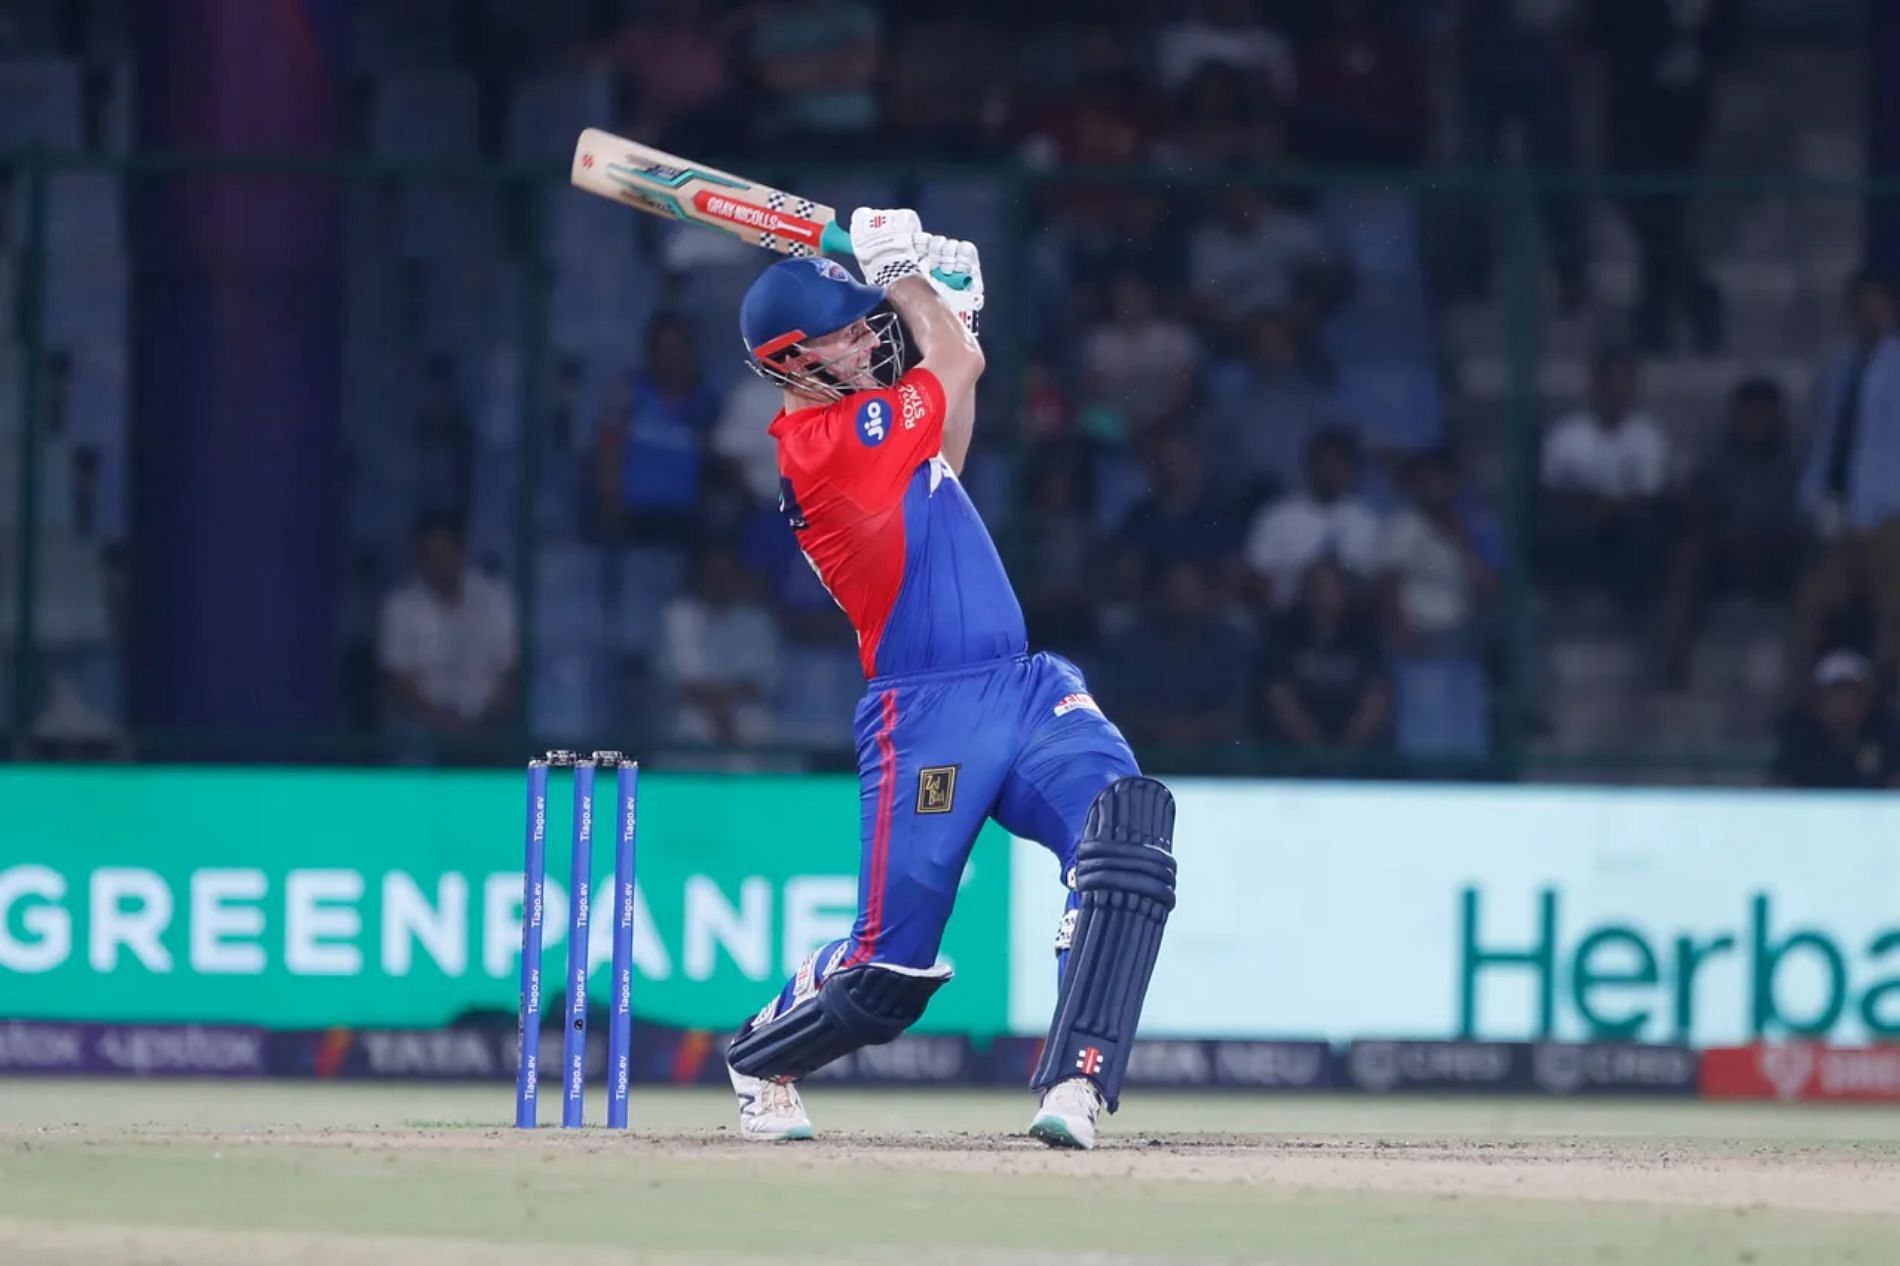 Mitchell Marsh has been in fantastic form lately. (Pic: iplt20.com)